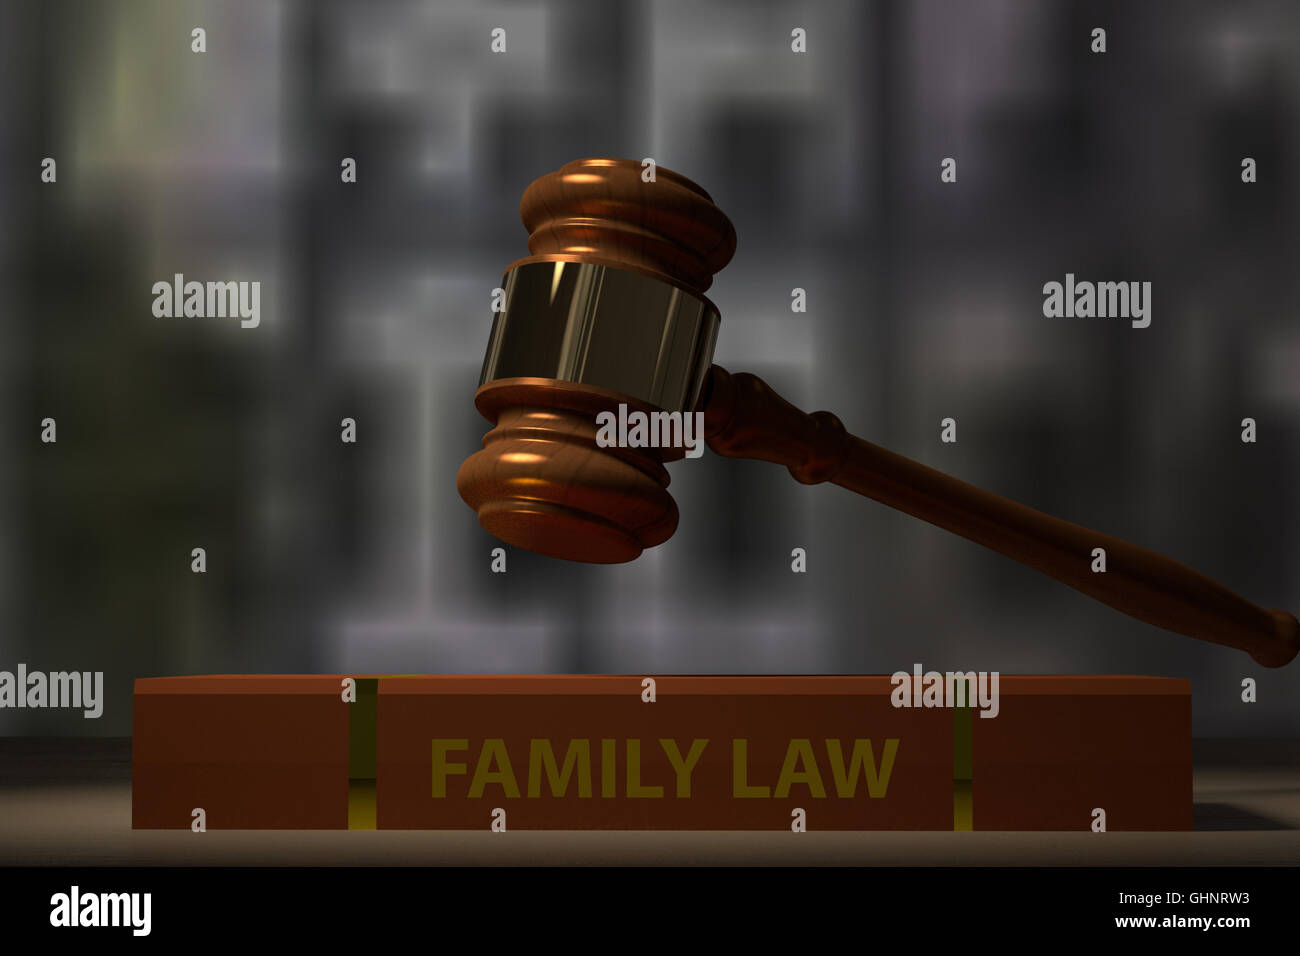 3D rendering of a judge hammer and a family law book on a table Stock Photo